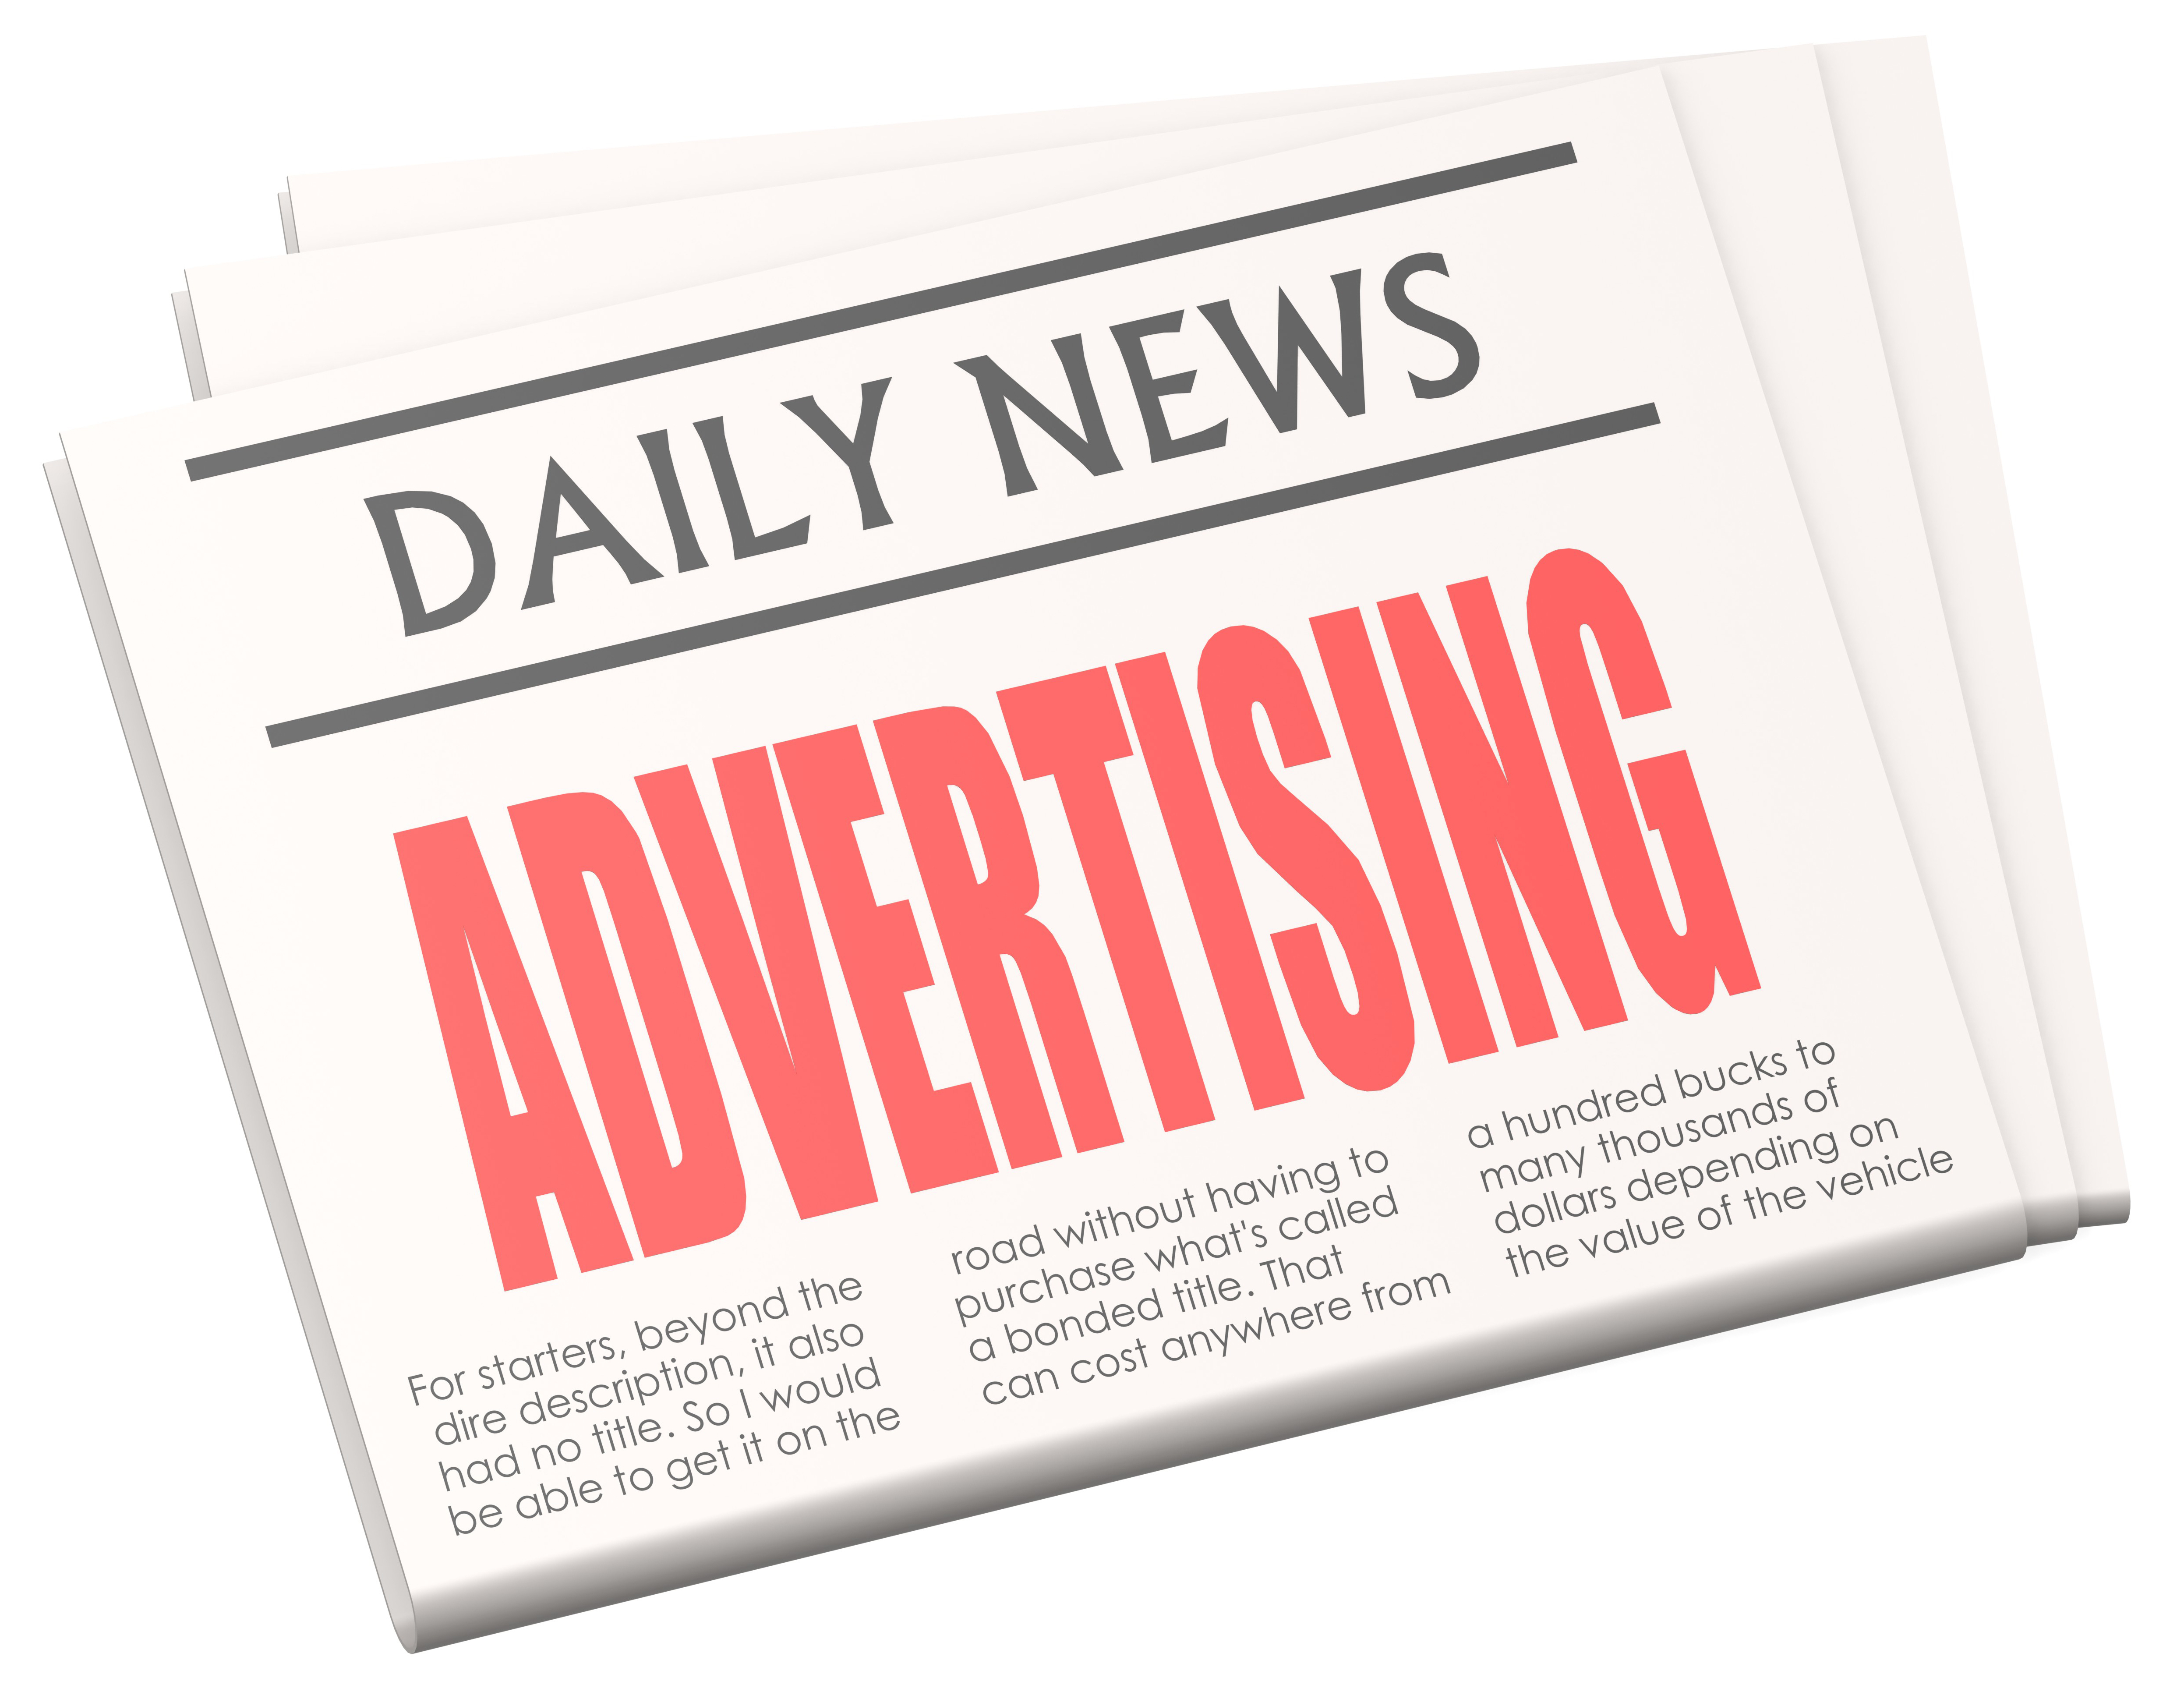 Why is newspaper advertising beneficial?